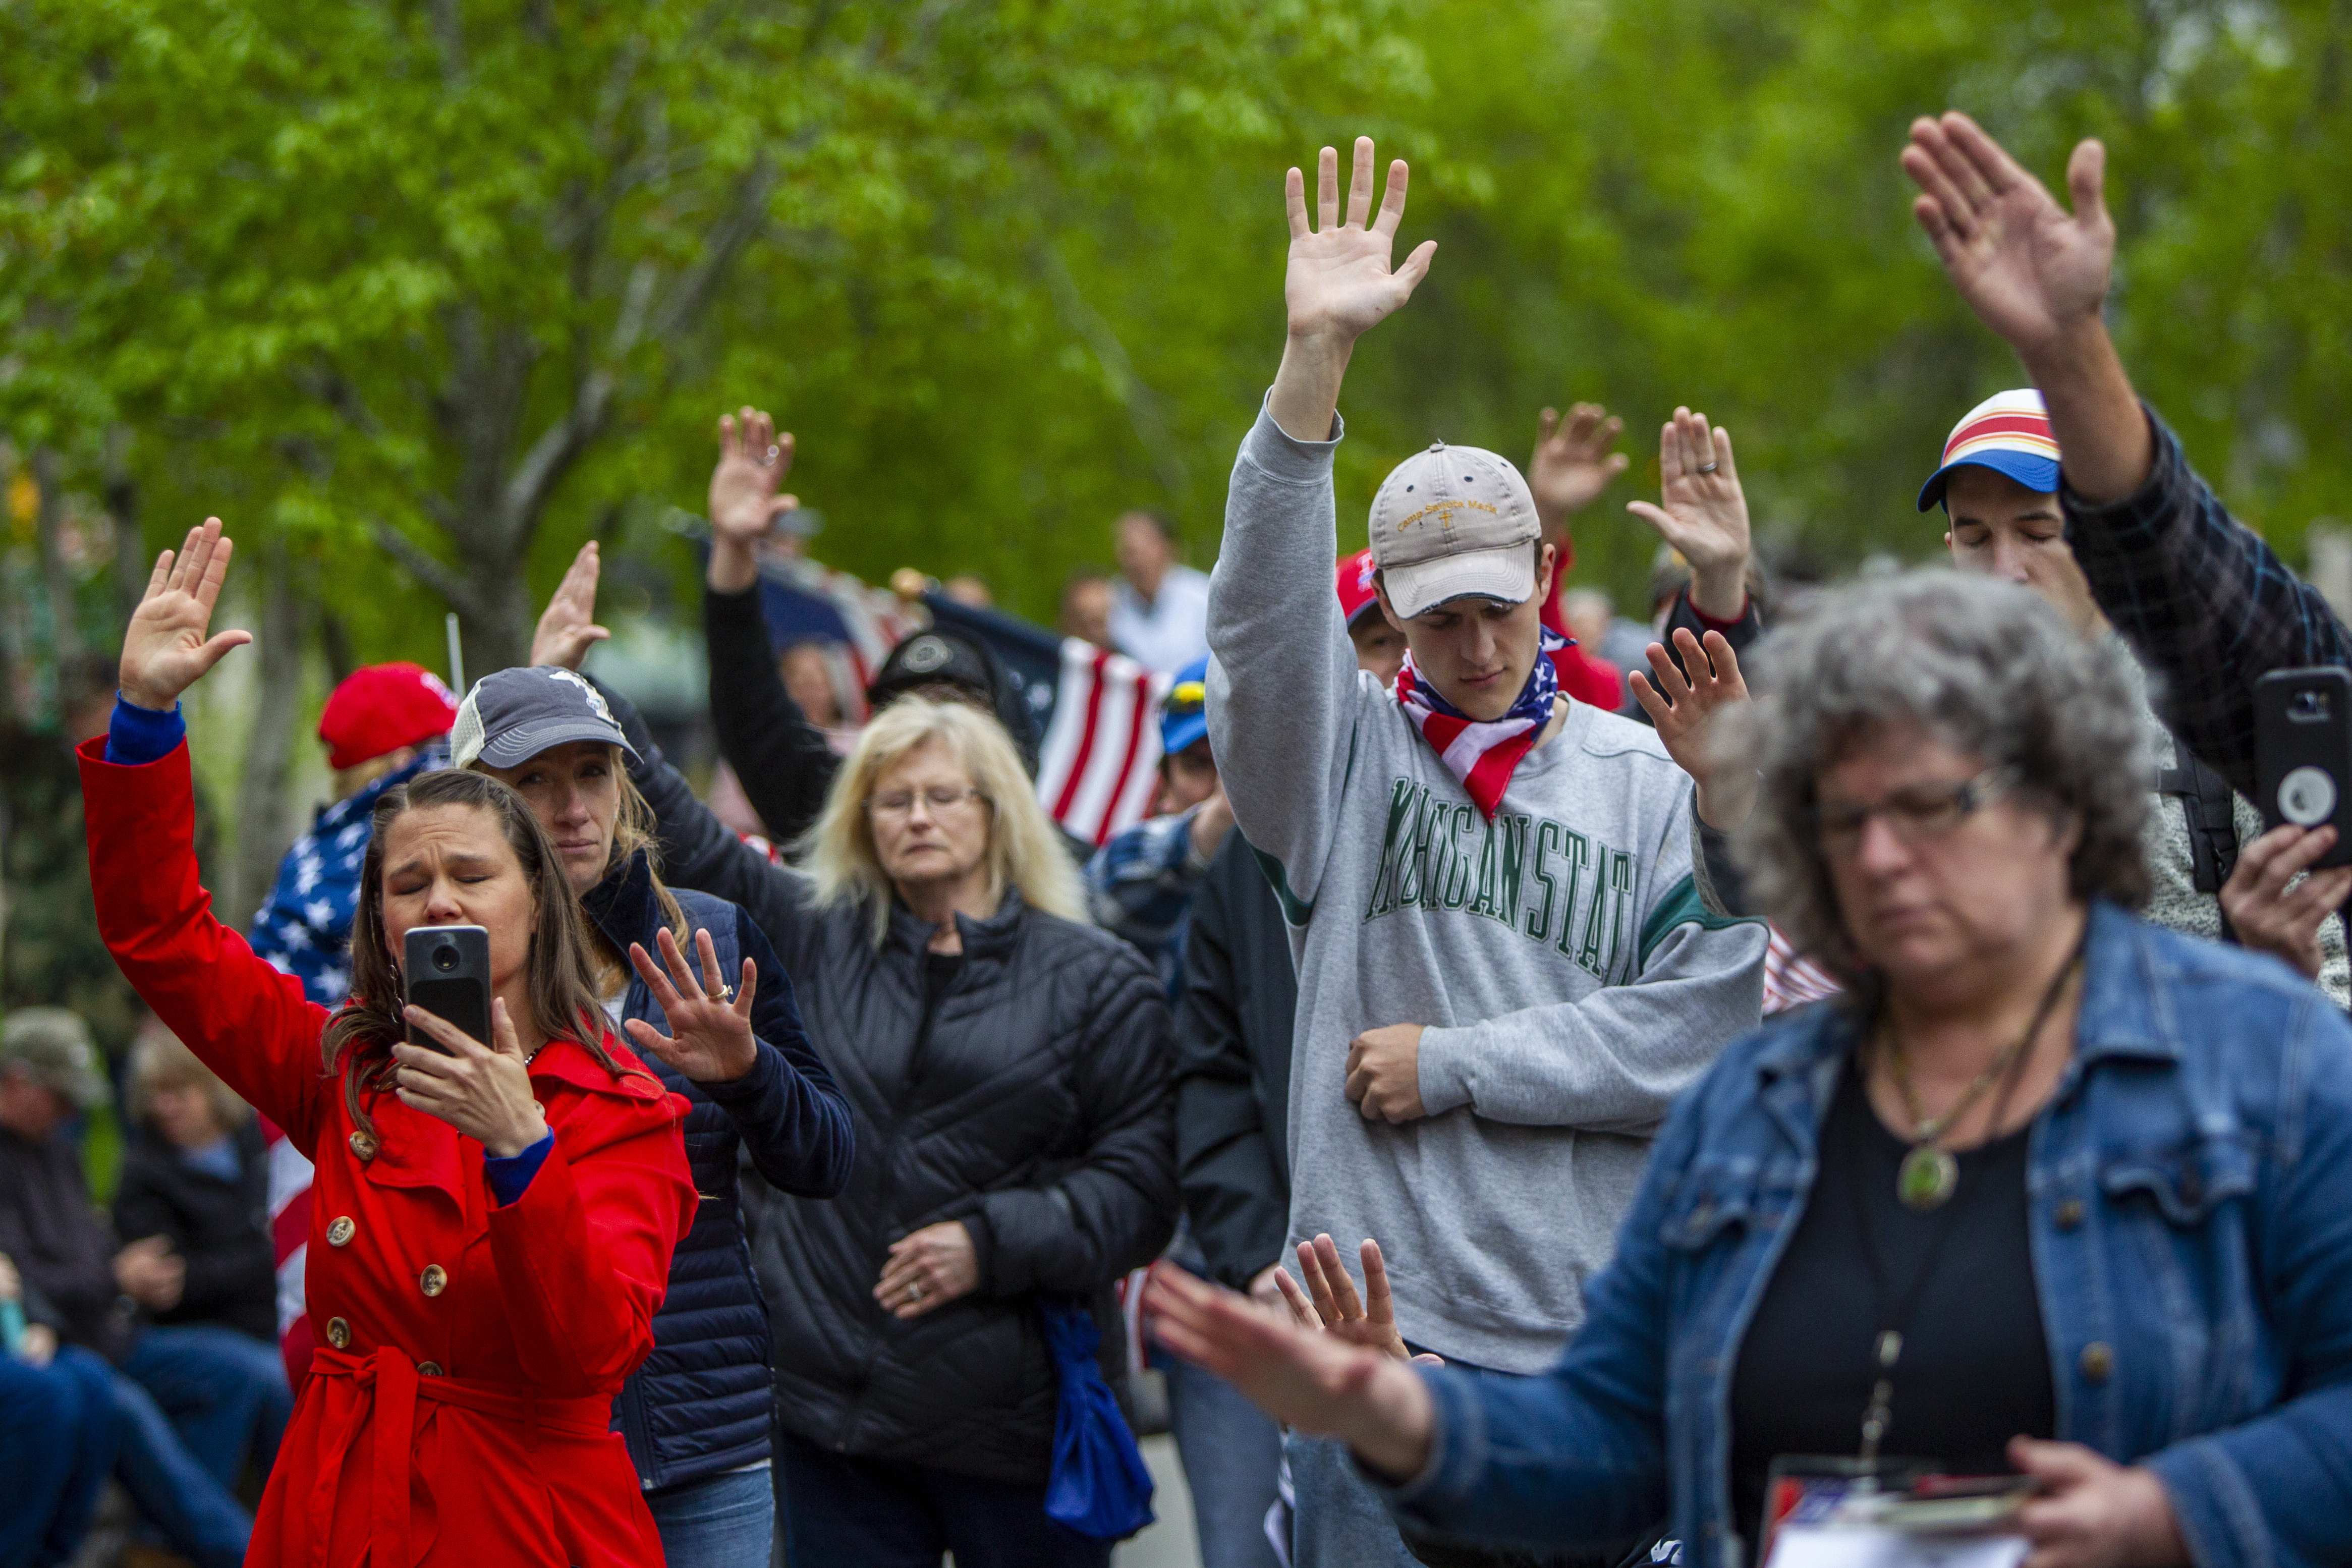 A crowd prays for law enforcement during the "American Patriot Rally-Sheriffs speak out" event at Rosa Parks Circle in downtown Grand Rapids on Monday, May 18, 2020. The crowd is protesting against Gov. Gretchen Whitmer's stay-at-home order. (Cory Morse | MLive.com)